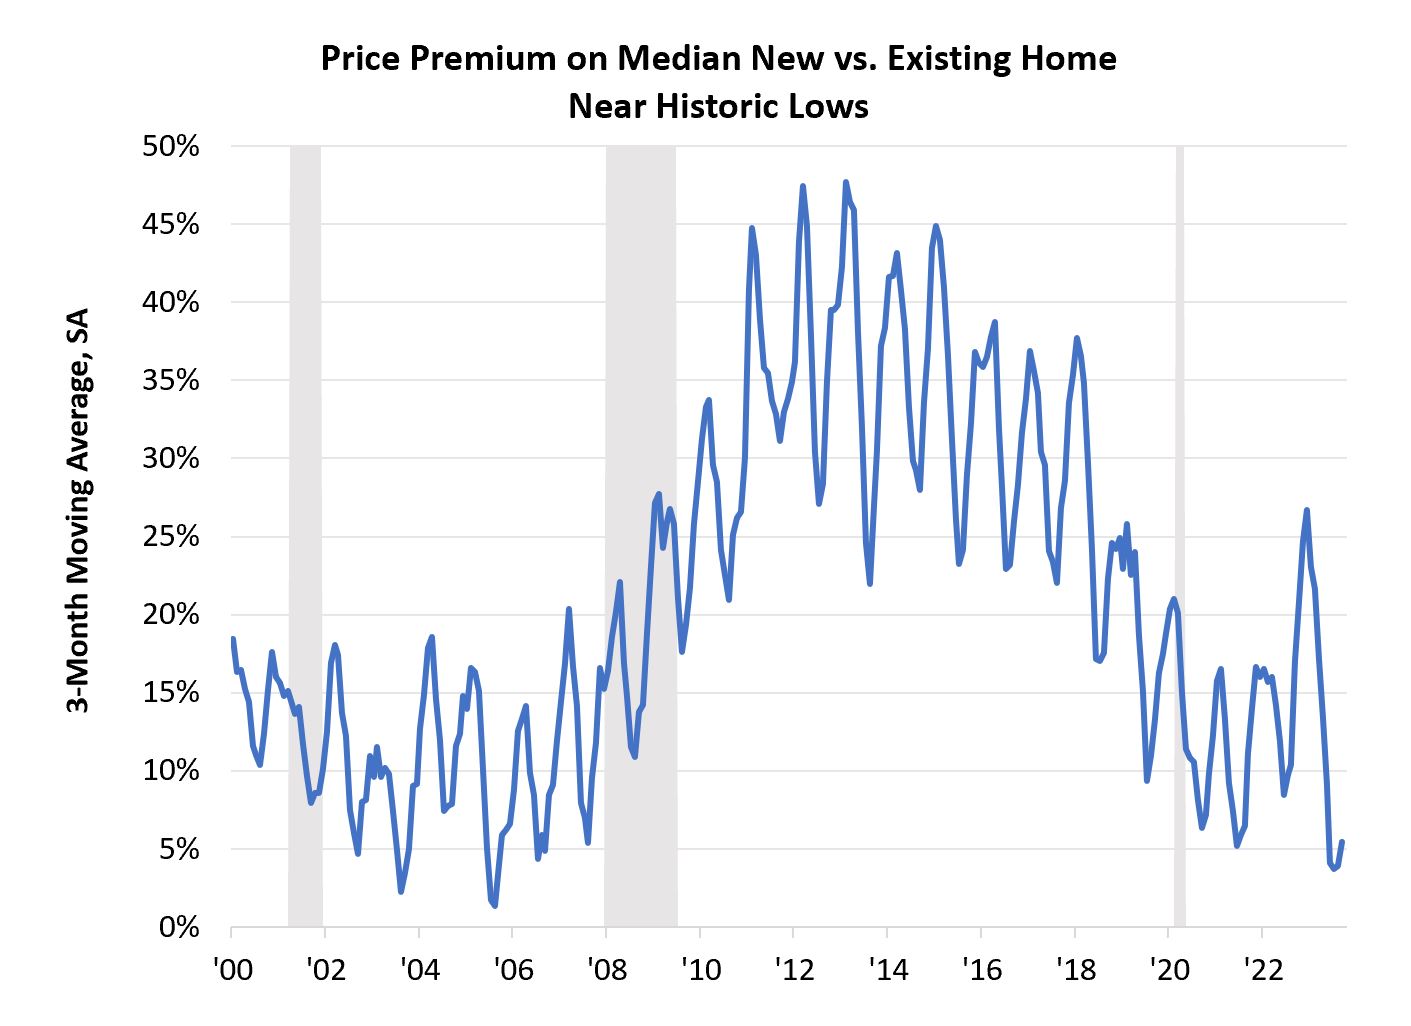 Price Premium on Median New vs. Existing Home Near Historic Lows